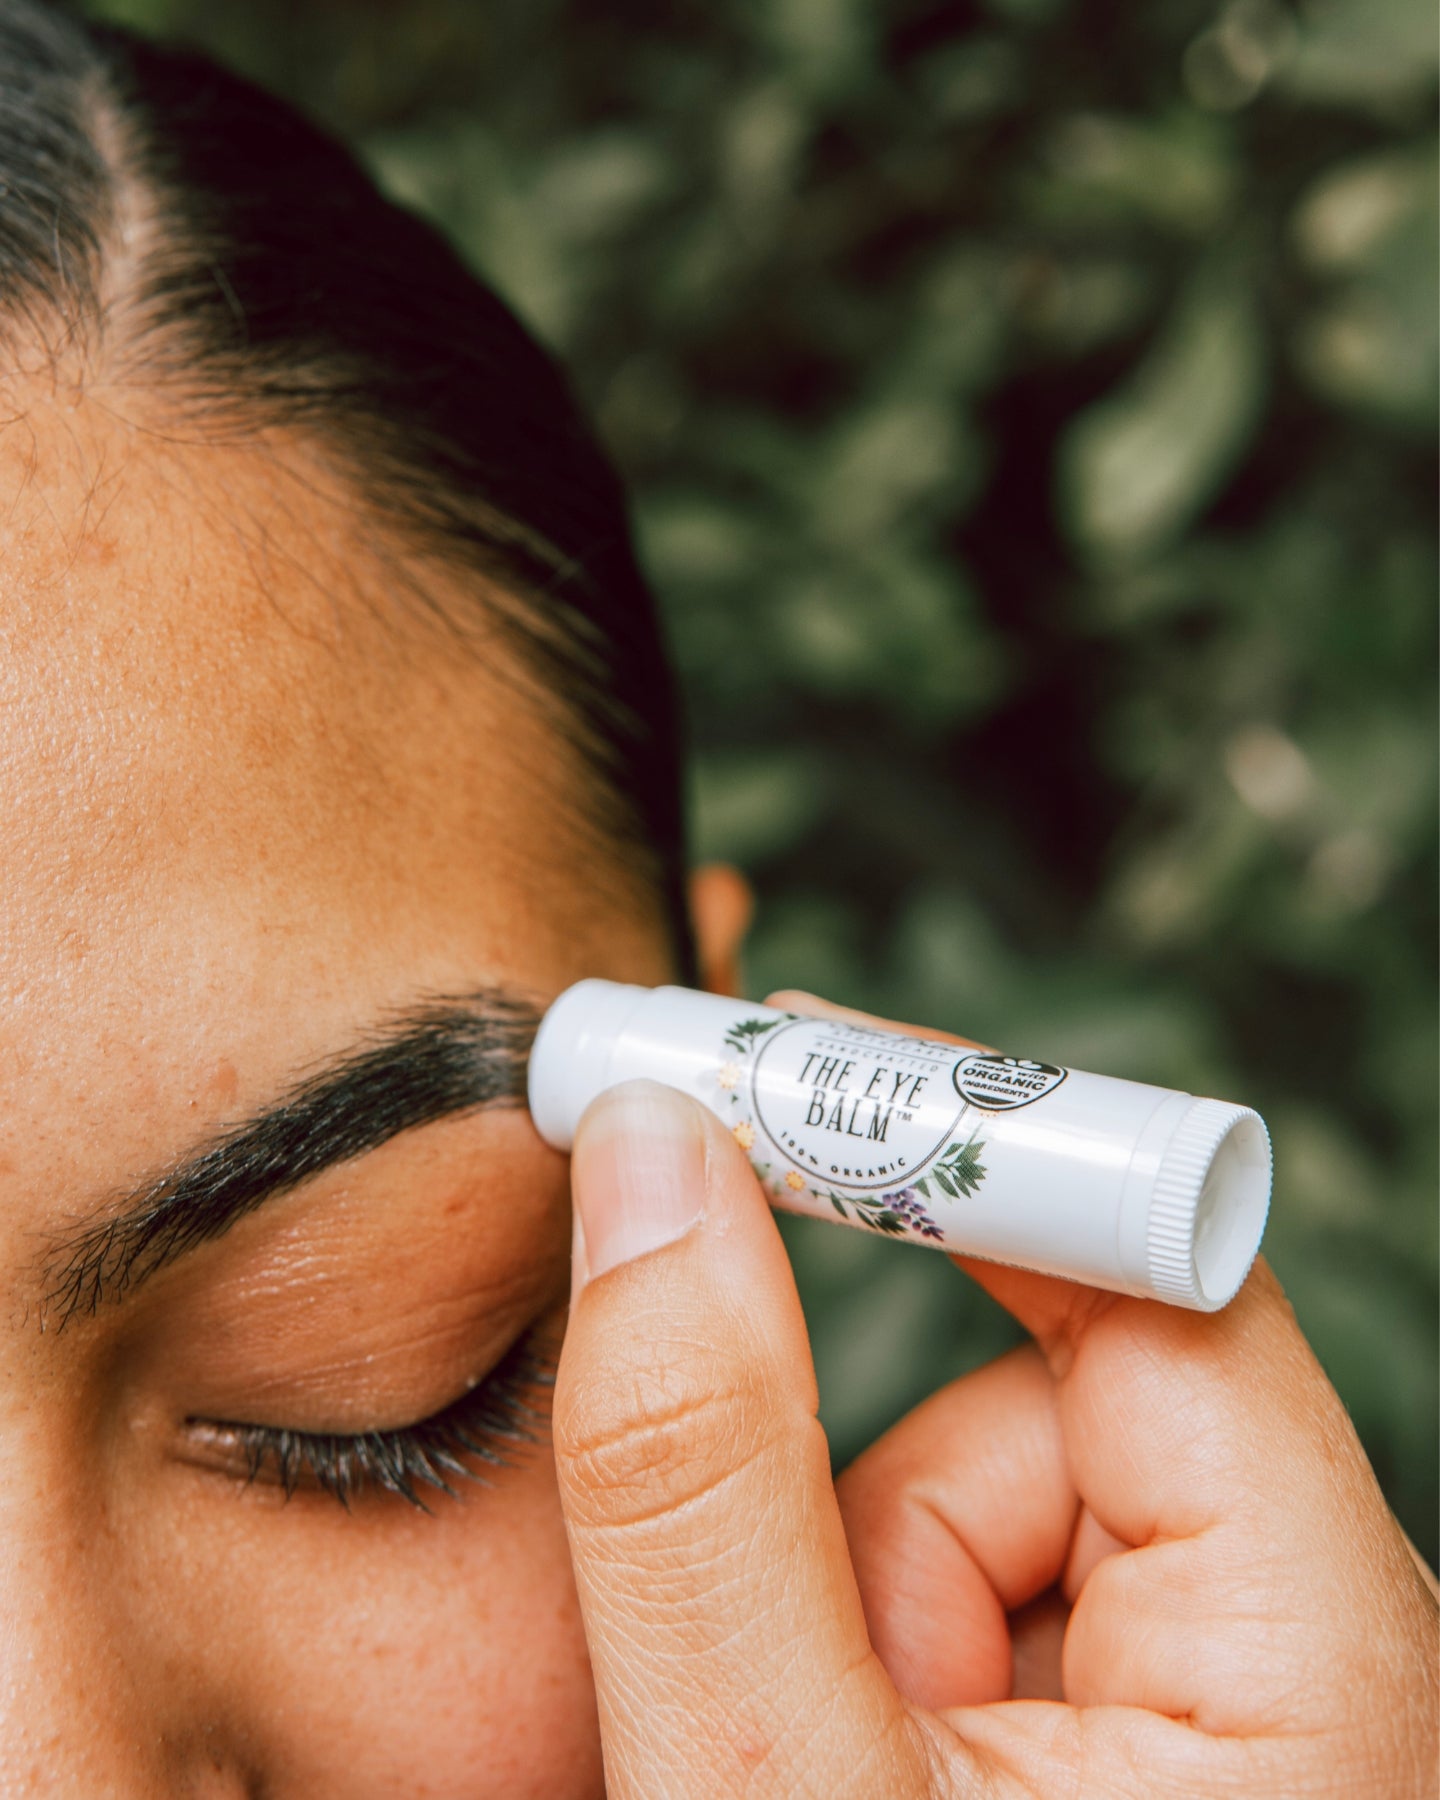 A close-up shot of a woman applying The Eye Balm™ to her eyebrows.